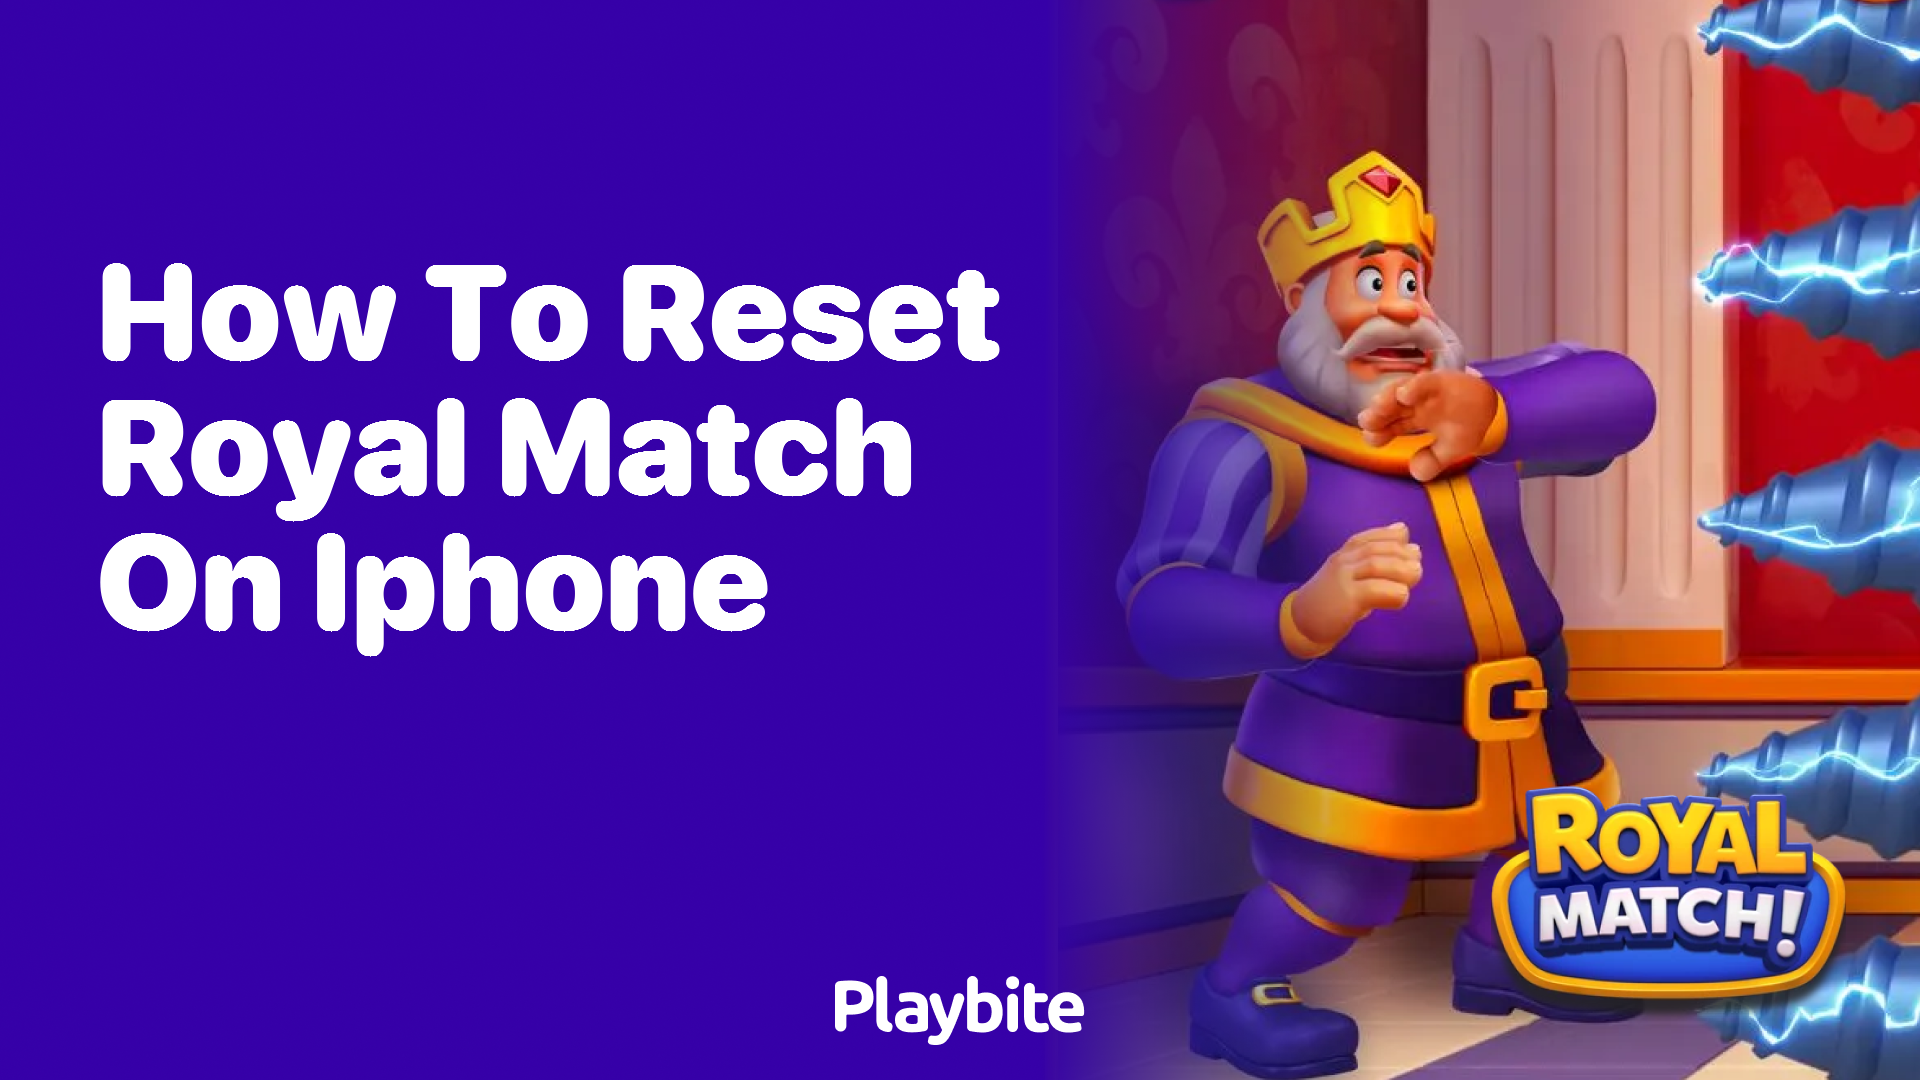 How to Reset Royal Match on iPhone: A Quick Guide